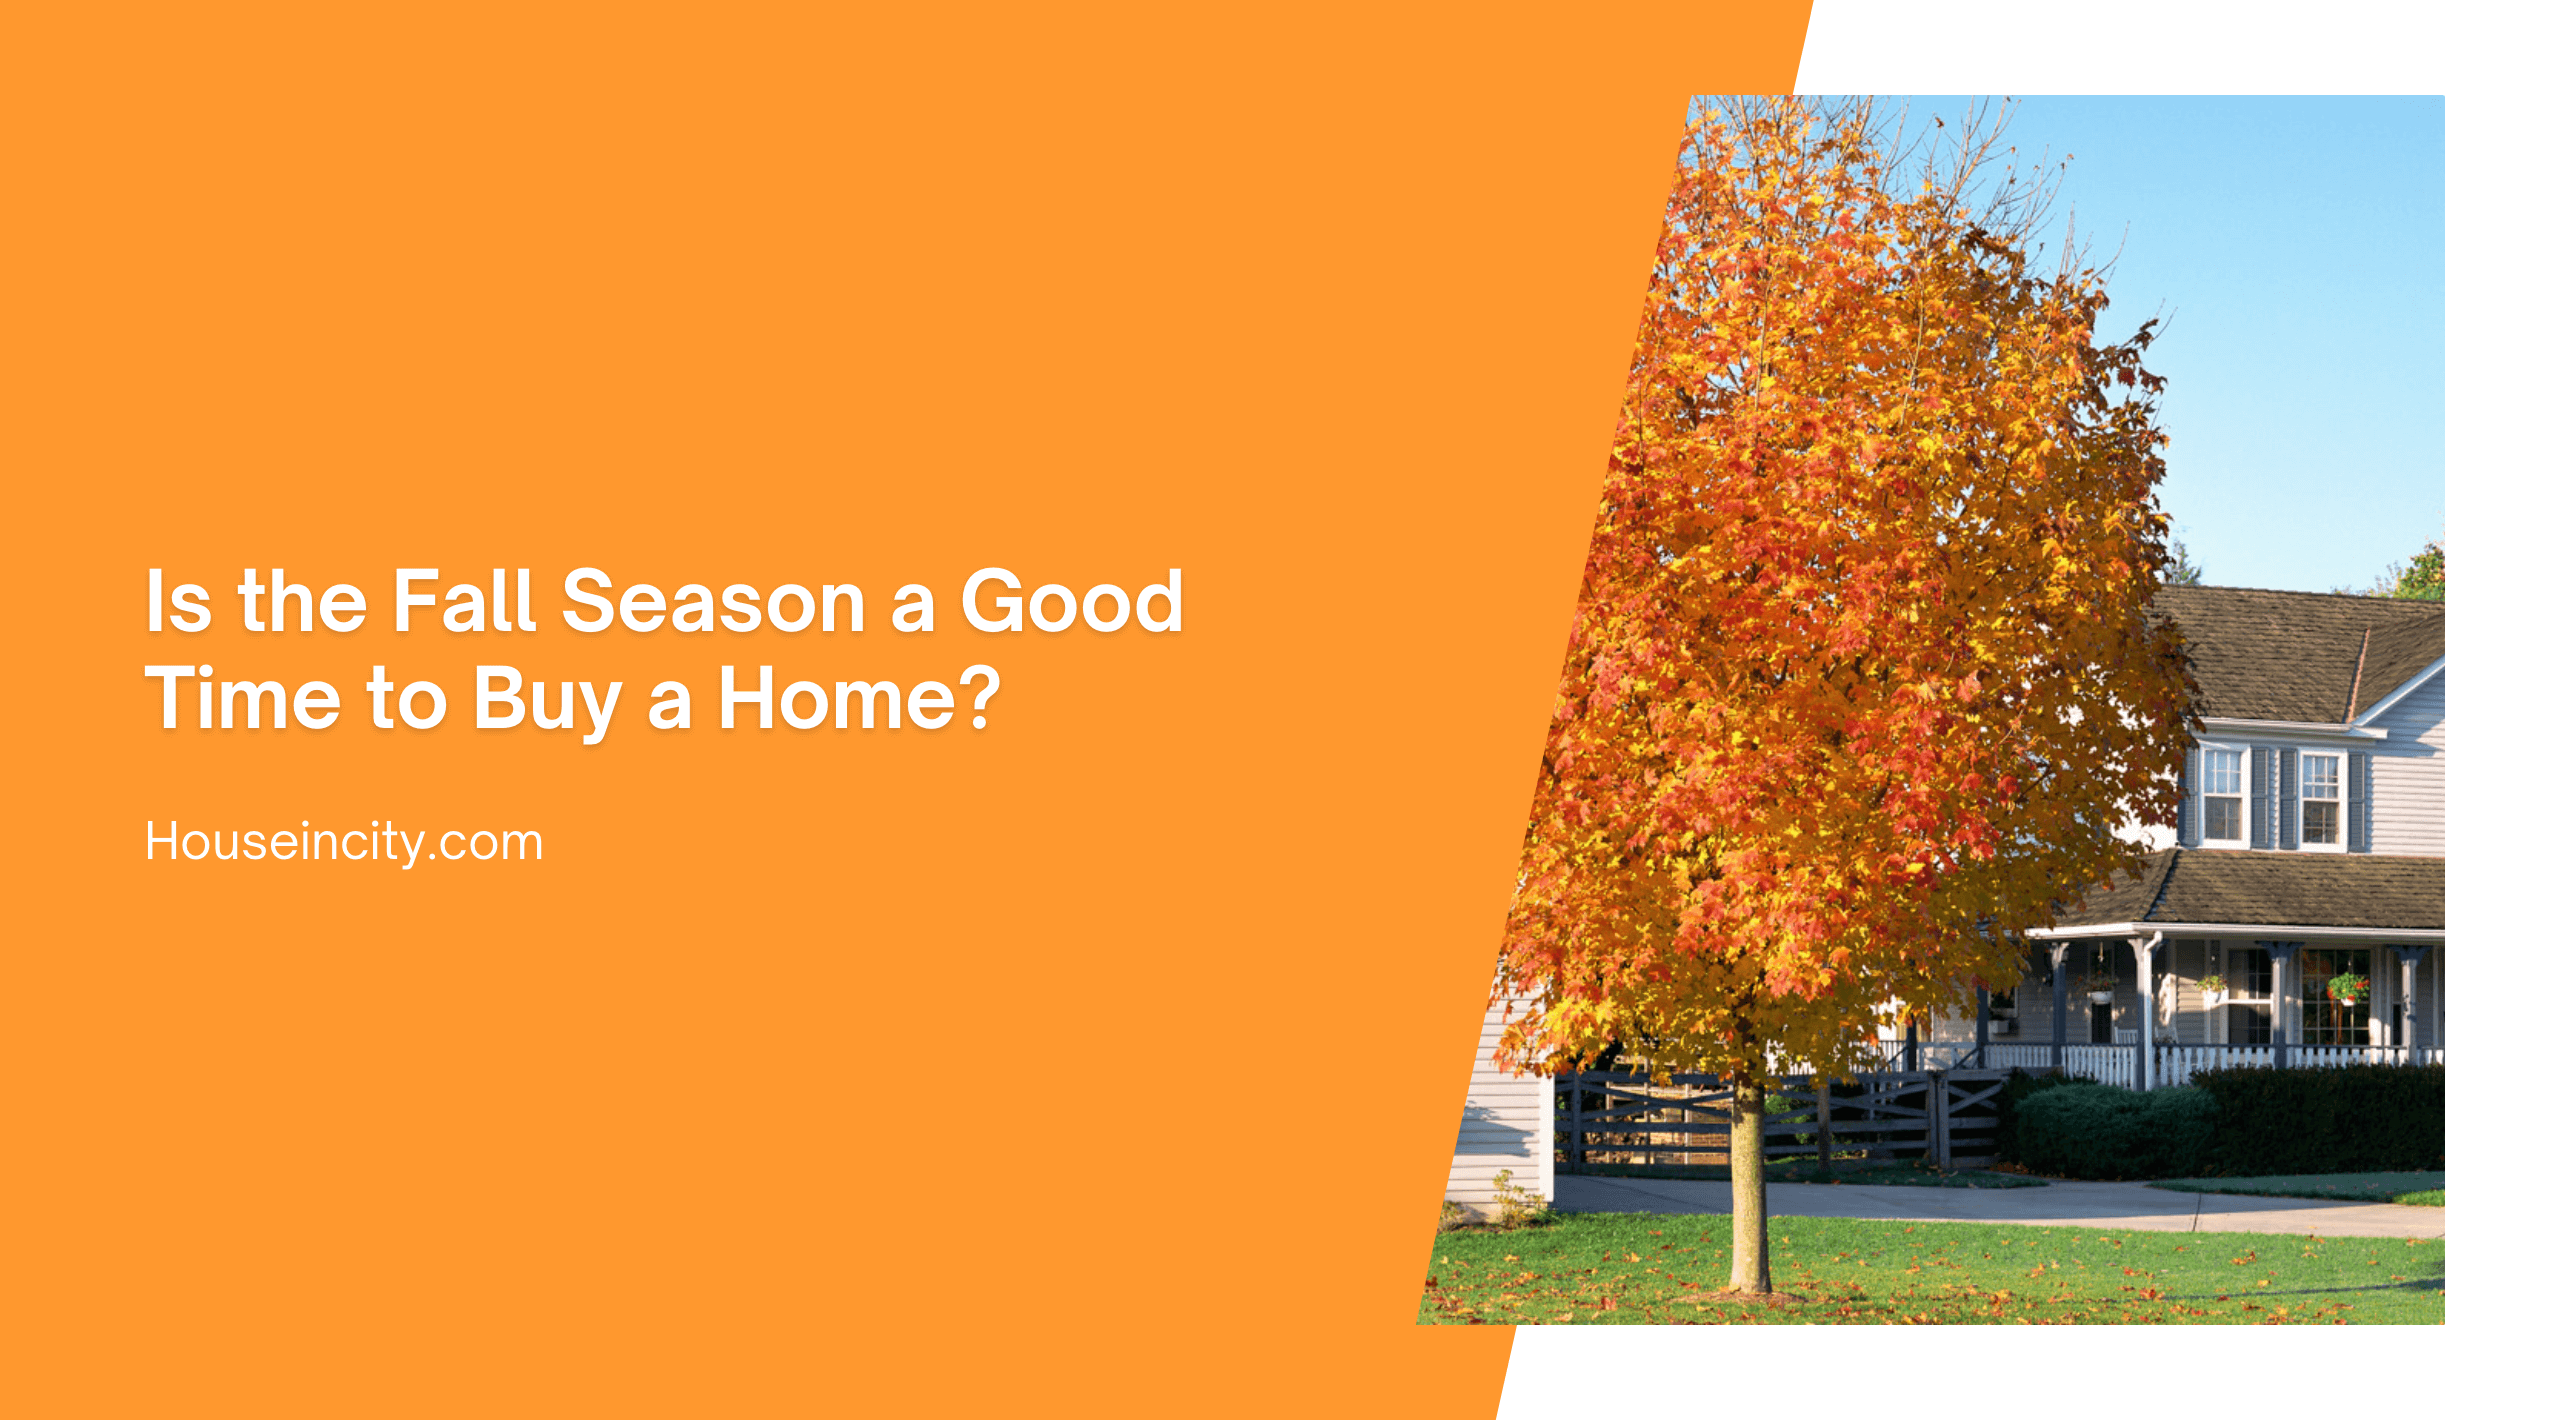 Is the Fall Season a Good Time to Buy a Home?